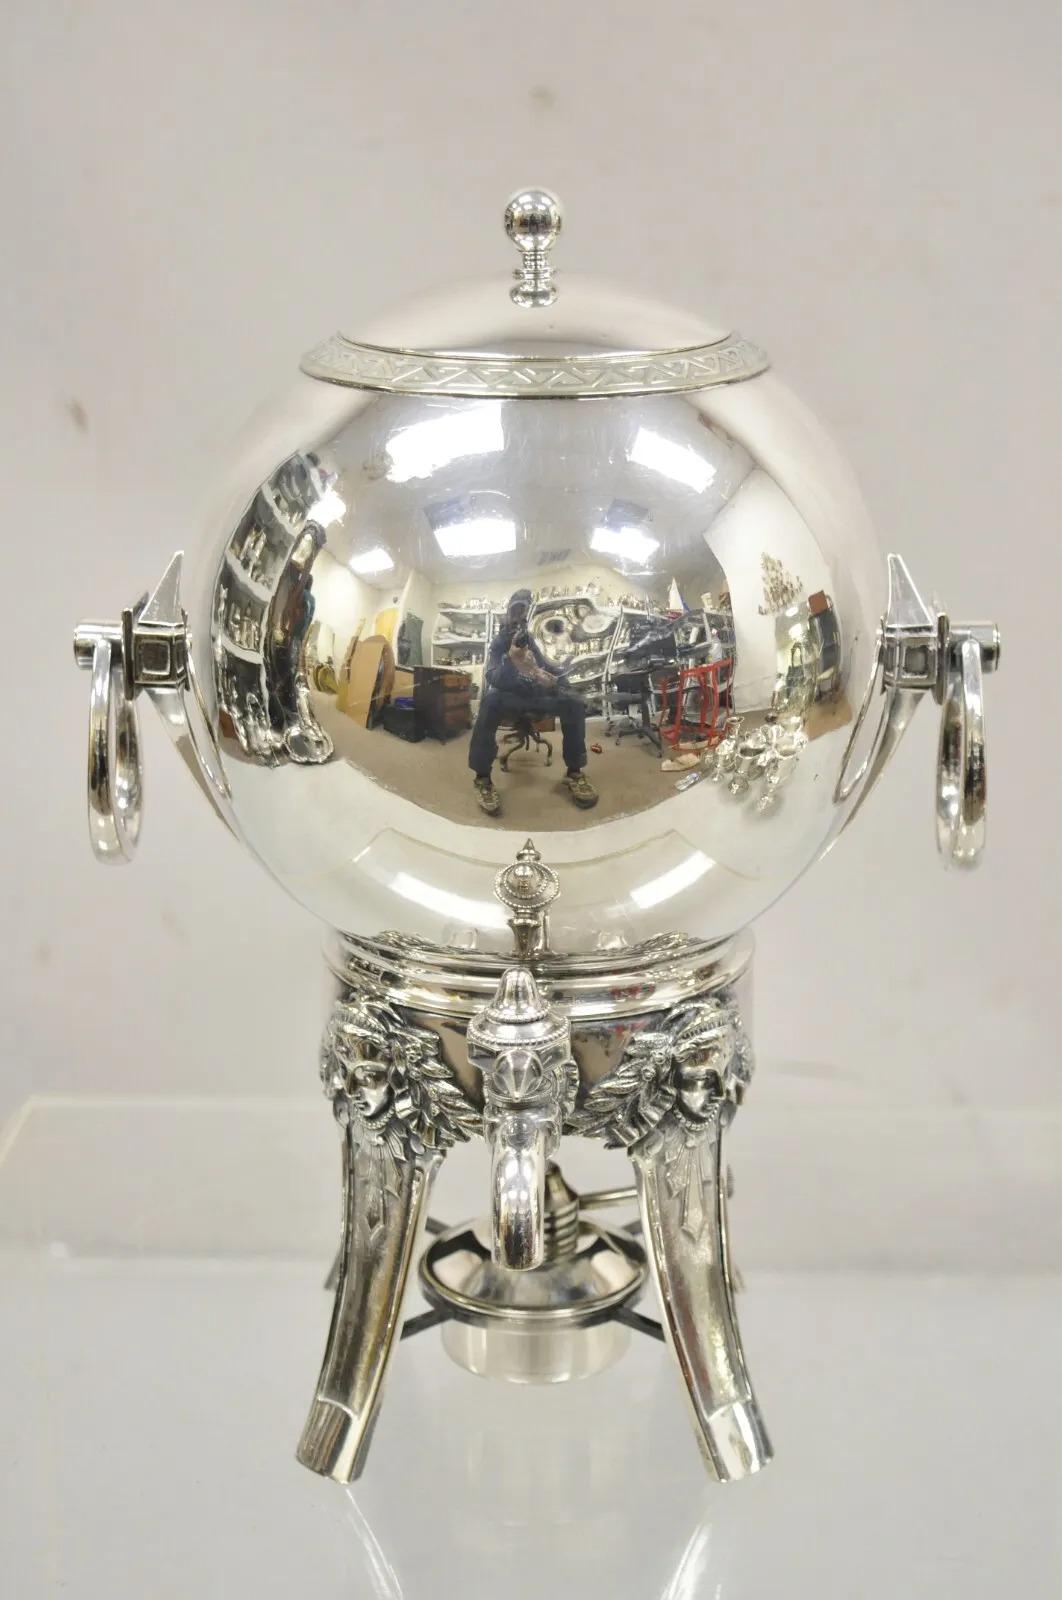 Antique Gorham Co Figural Silver Plated Art Deco Ball Form Samovar Hot Water Drinks Dispenser. Item features  